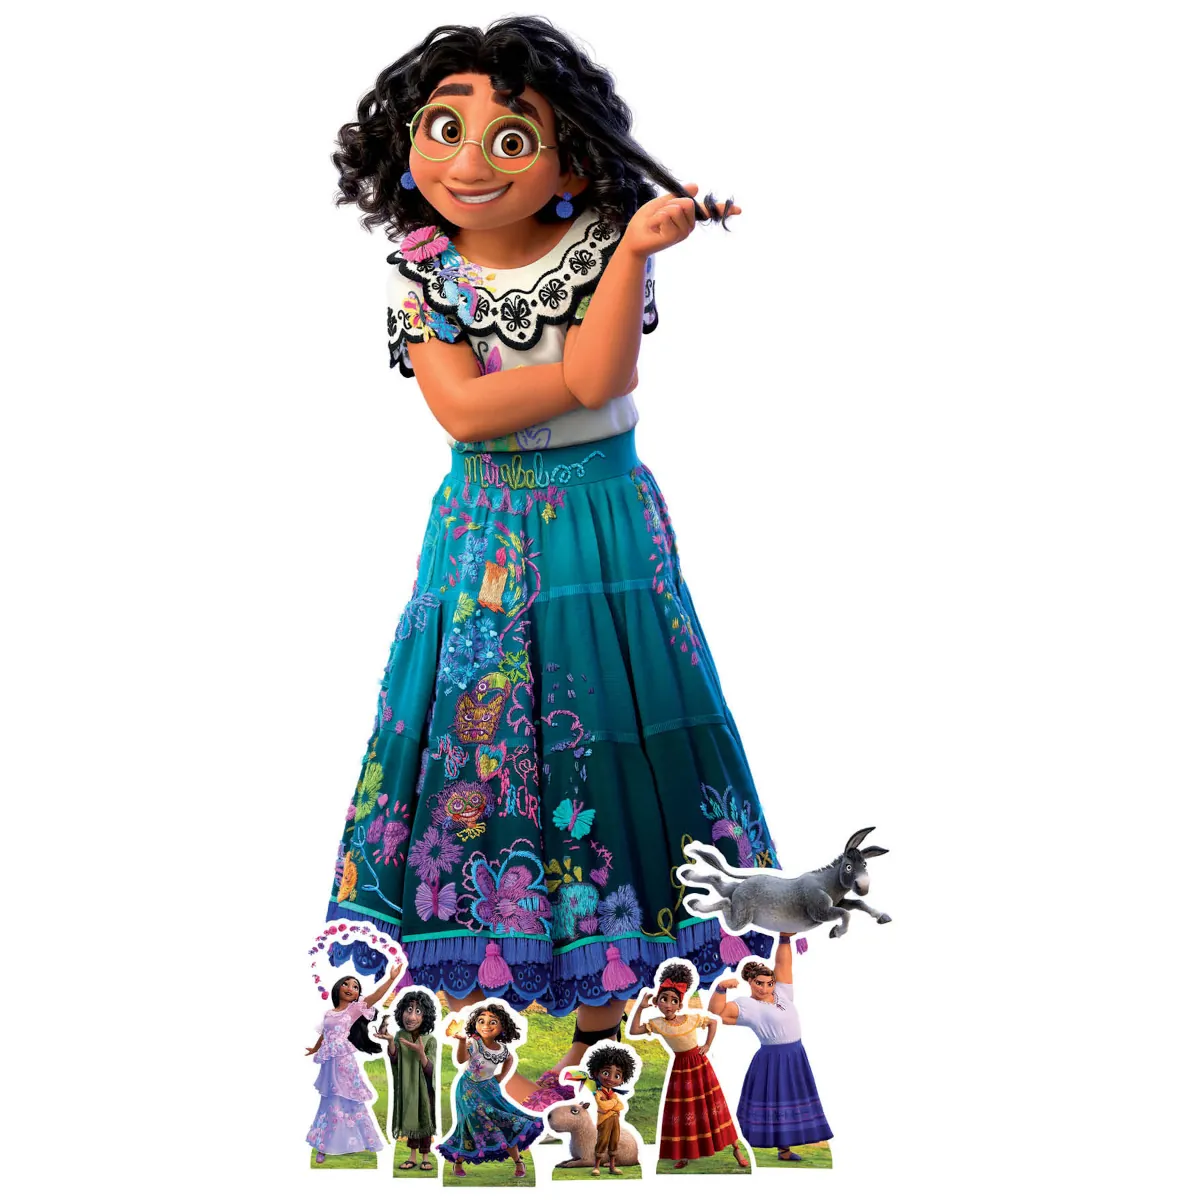 SP017 Mirabel (Disney Encanto) Official Lifesize + 6 Mini Party Pack Cardboard Cutout Standee Front